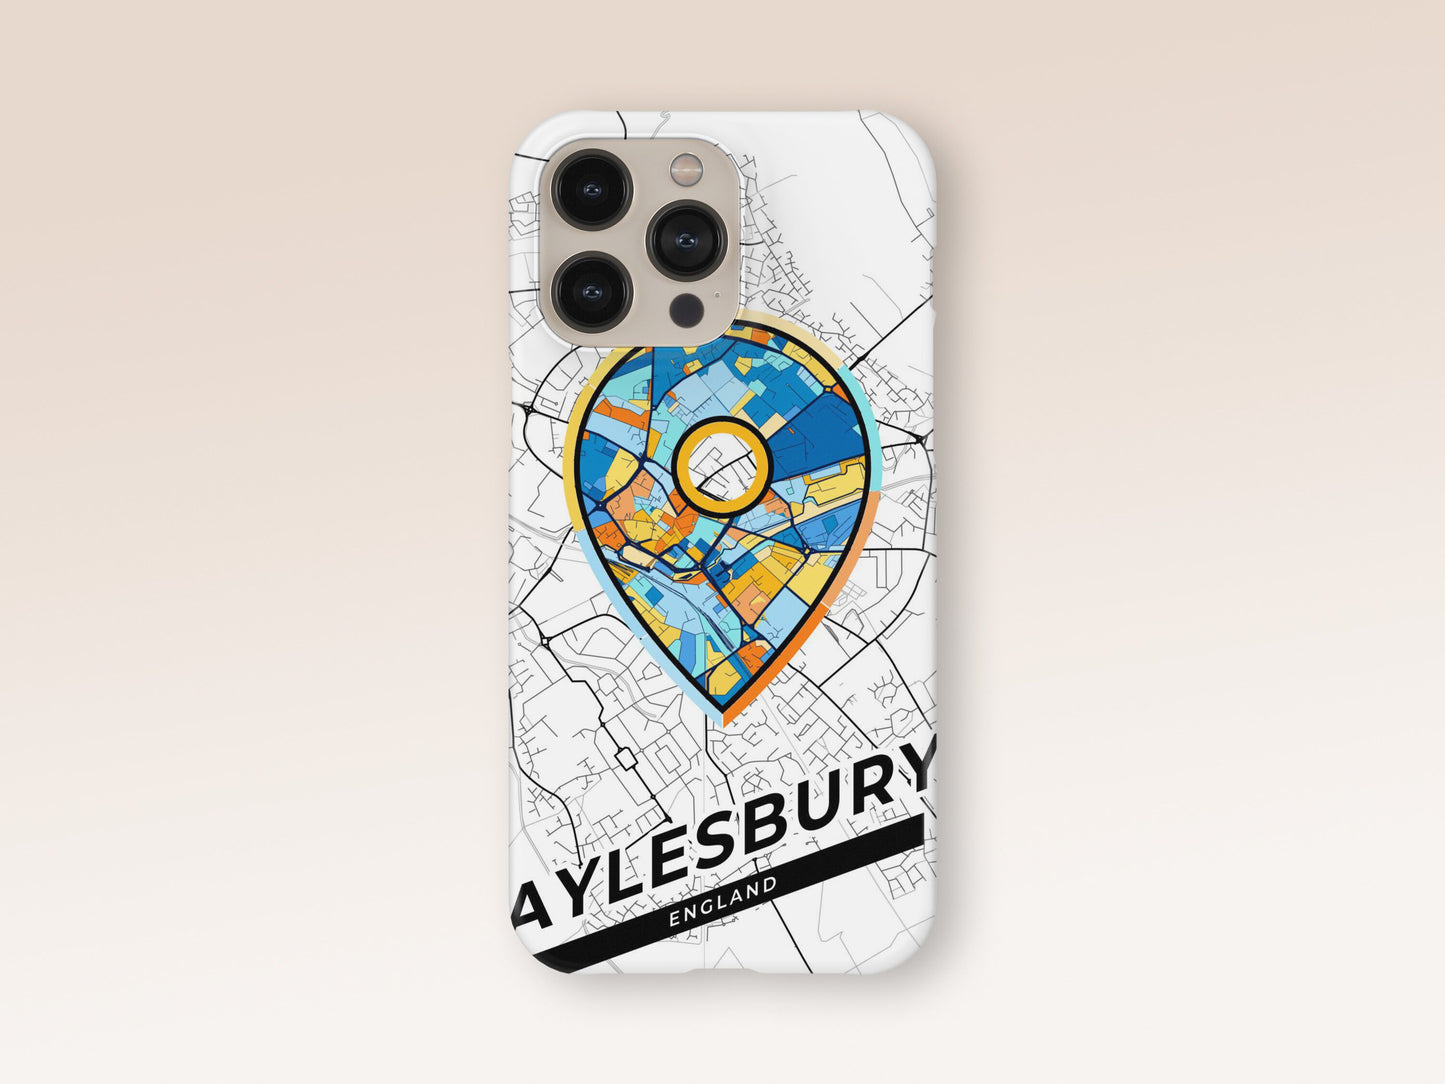 Aylesbury England slim phone case with colorful icon. Birthday, wedding or housewarming gift. Couple match cases. 1